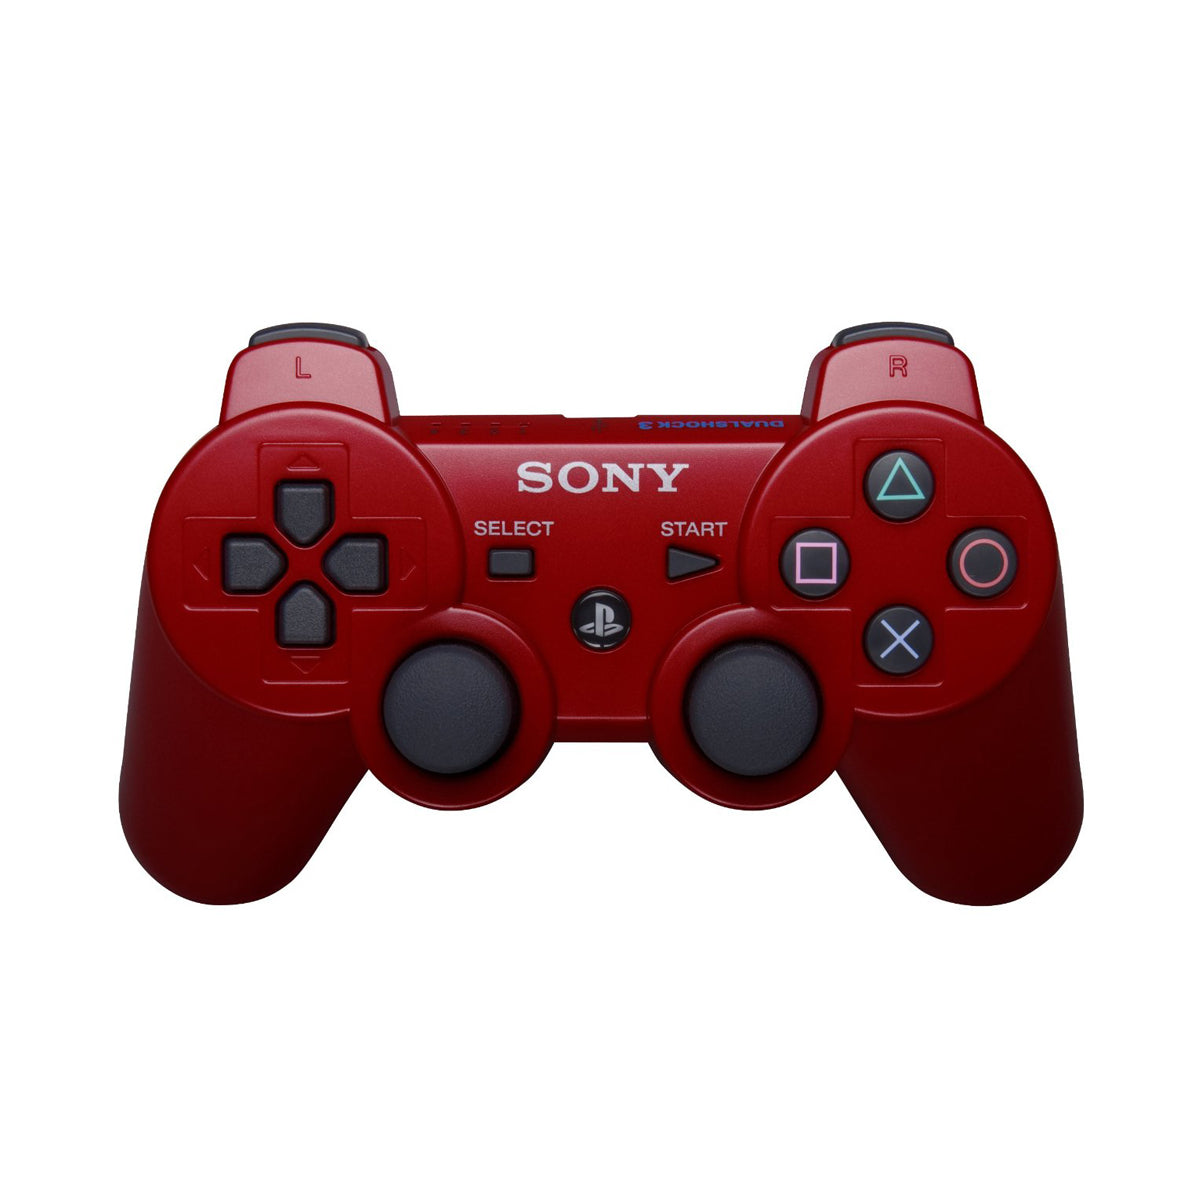 Sony PlayStation 3 DualShock 3 Analog Controller - Deep Red - YourGamingShop.com - Buy, Sell, Trade Video Games Online. 120 Day Warranty. Satisfaction Guaranteed.